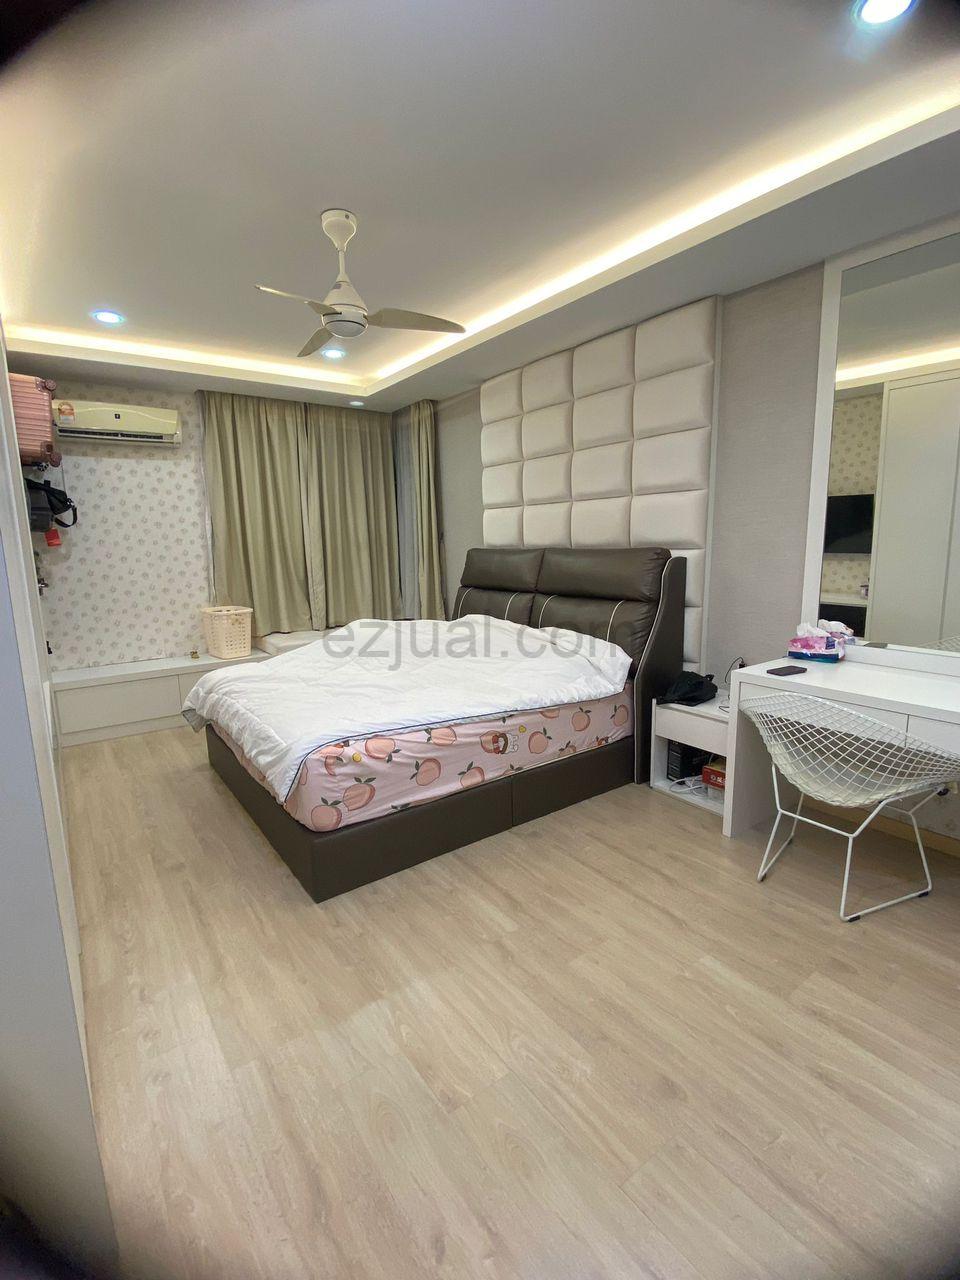 D'Ambience @Permas Jaya 3rooms Full Furnish & Renovated House For Sale